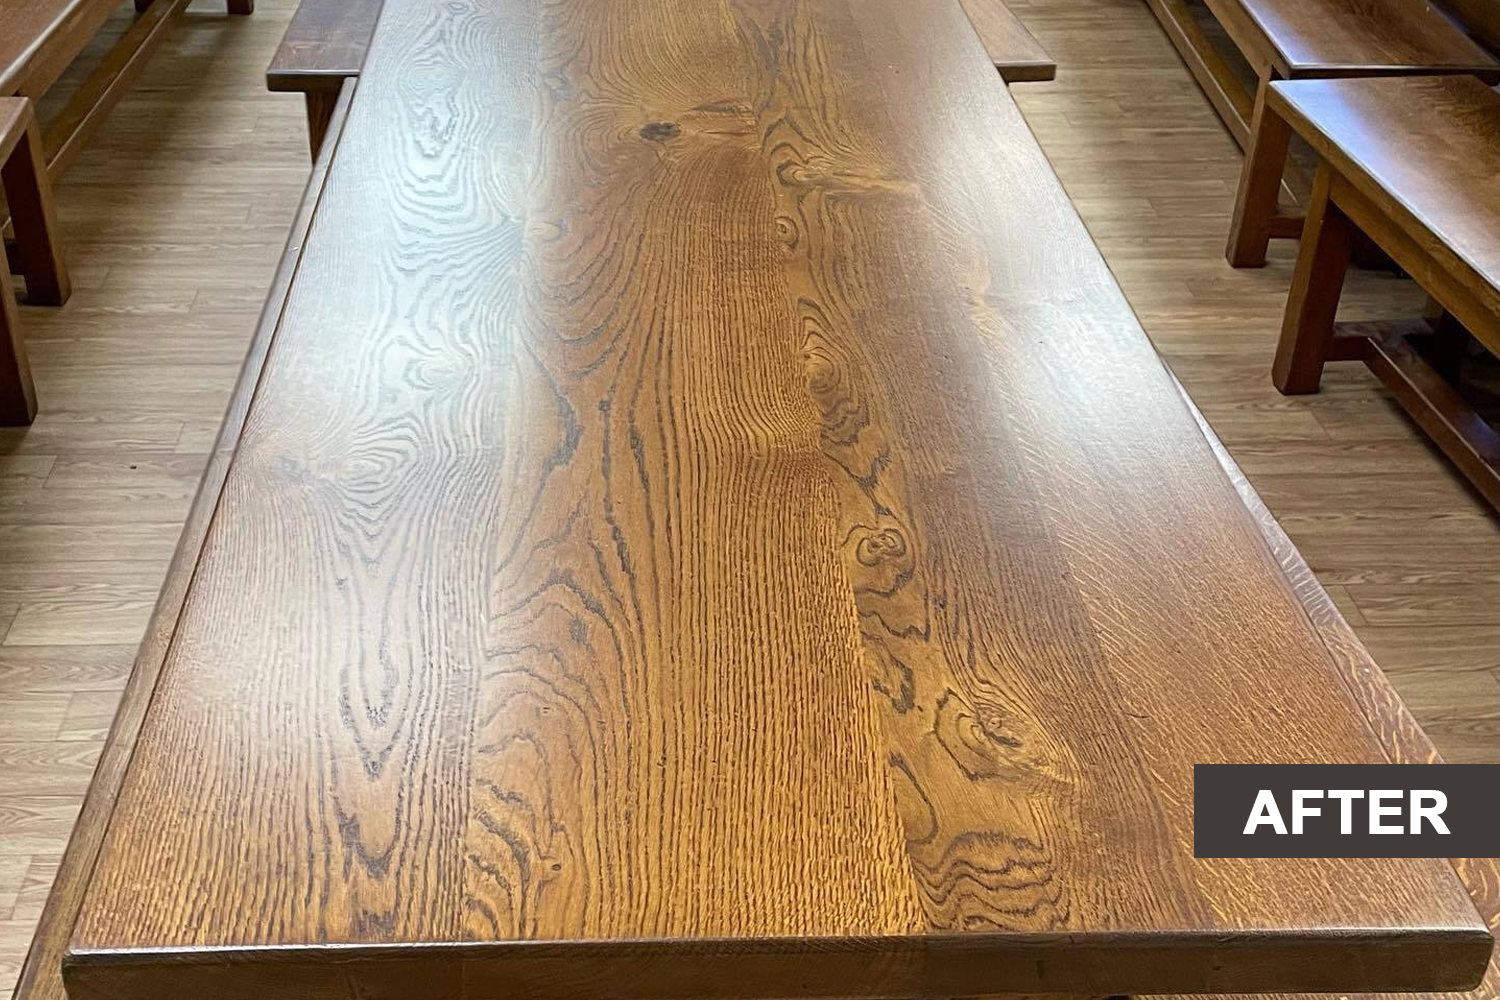 School dining tables after polishing